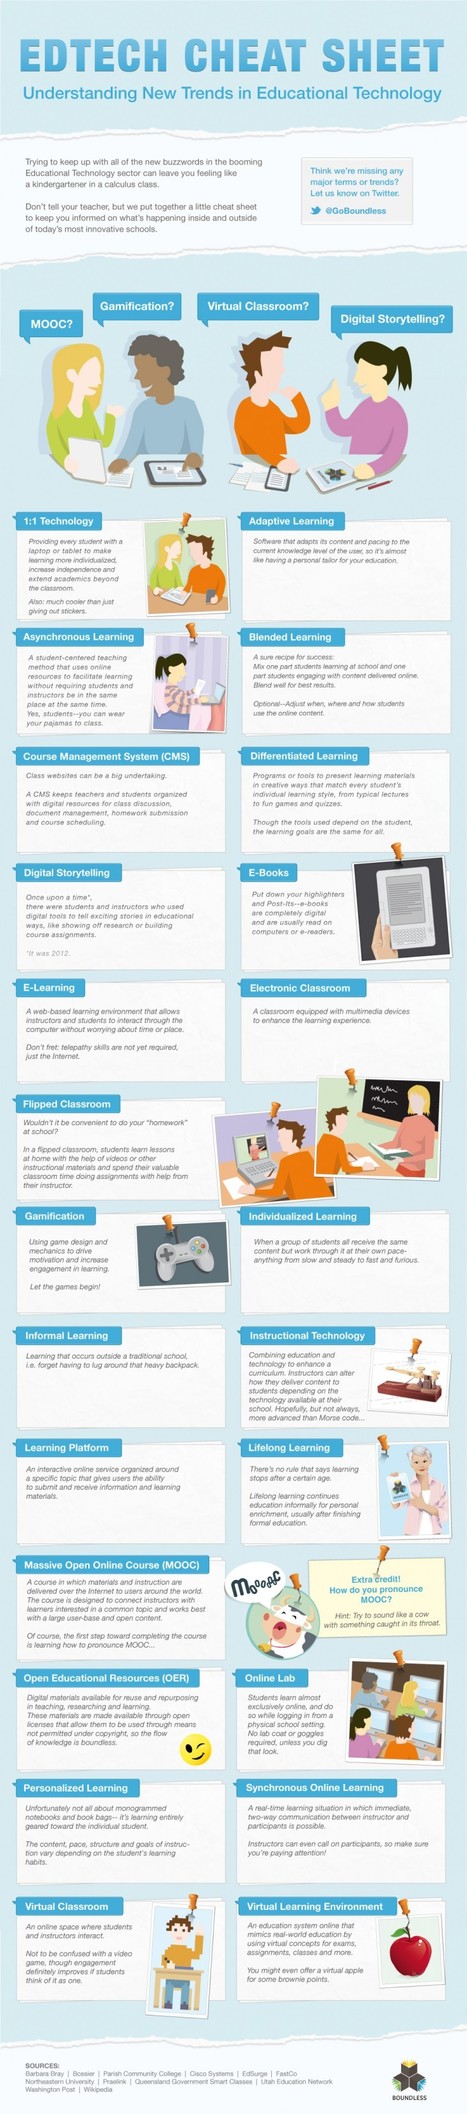 The Must-Have EdTech Cheat Sheet [Infographic] | 21st Century Learning and Teaching | Scoop.it